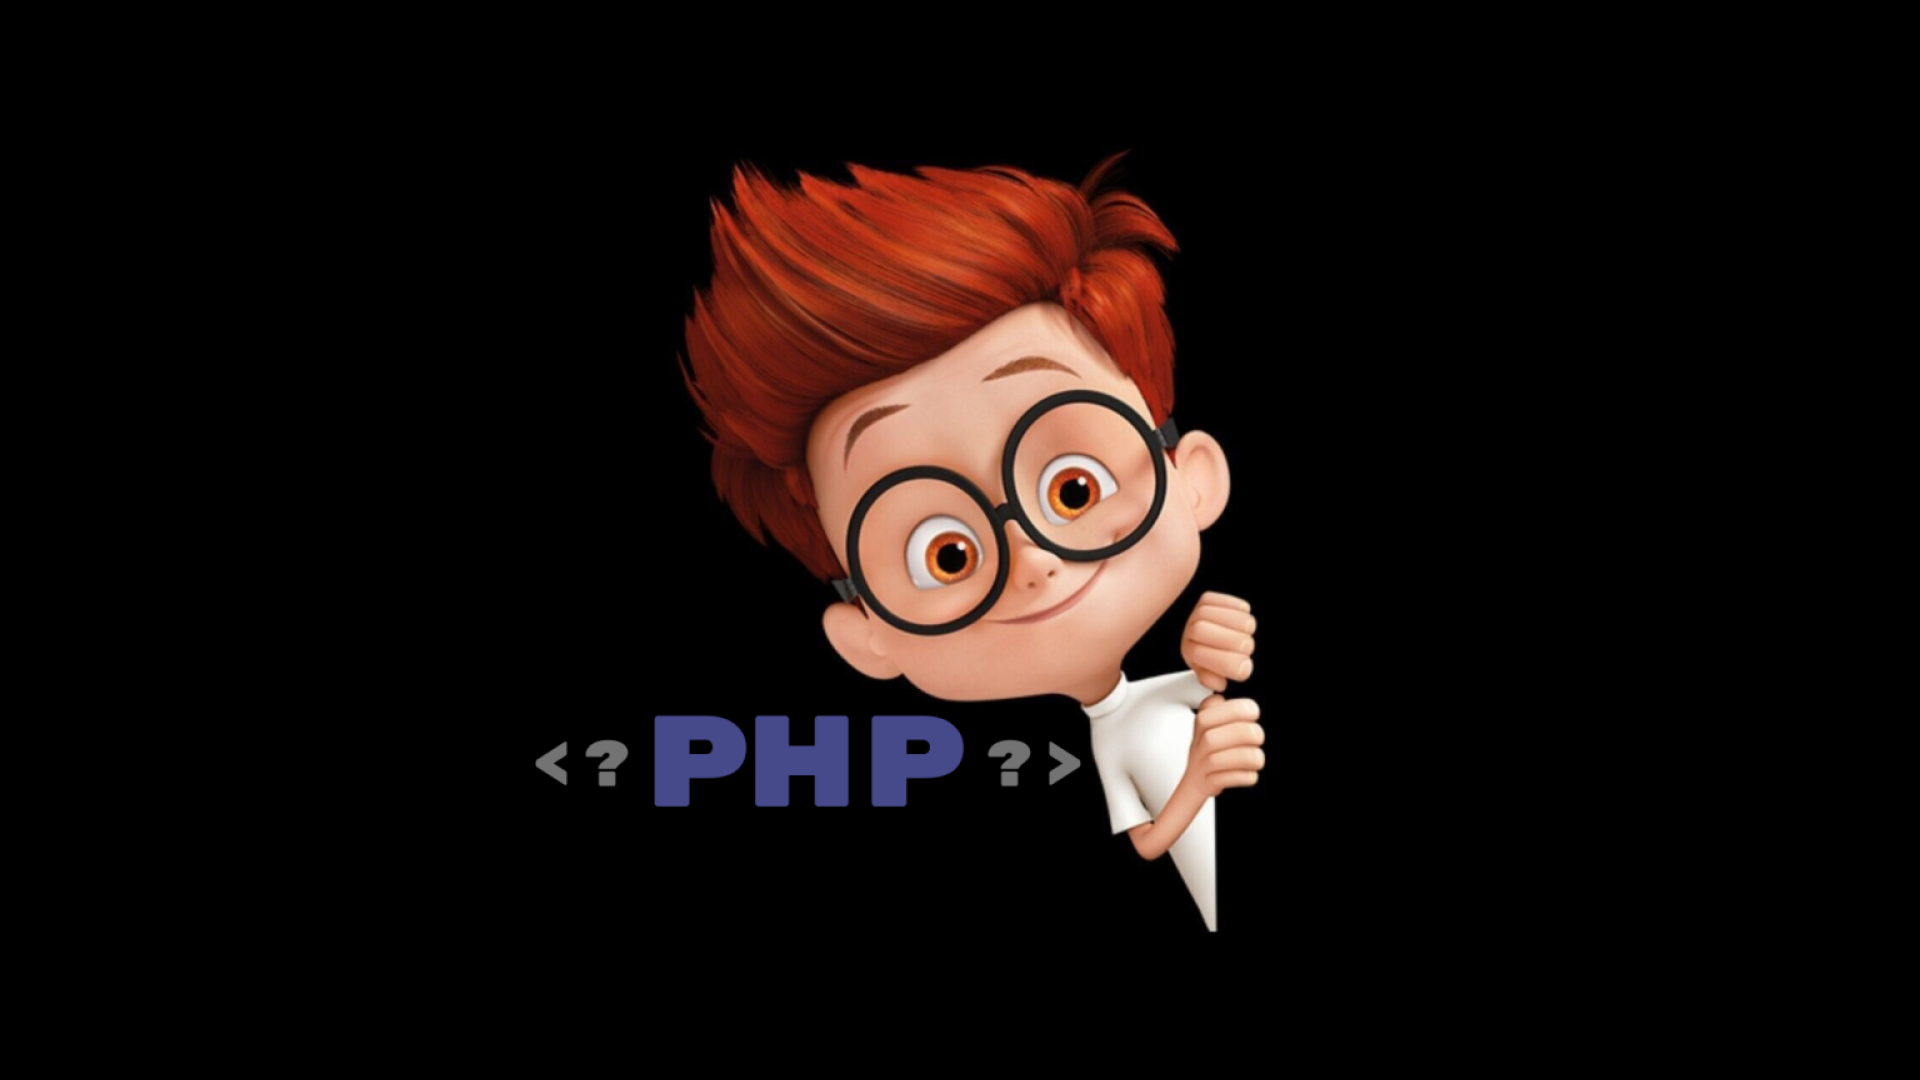 A cartoon figure sneaking to see PHP